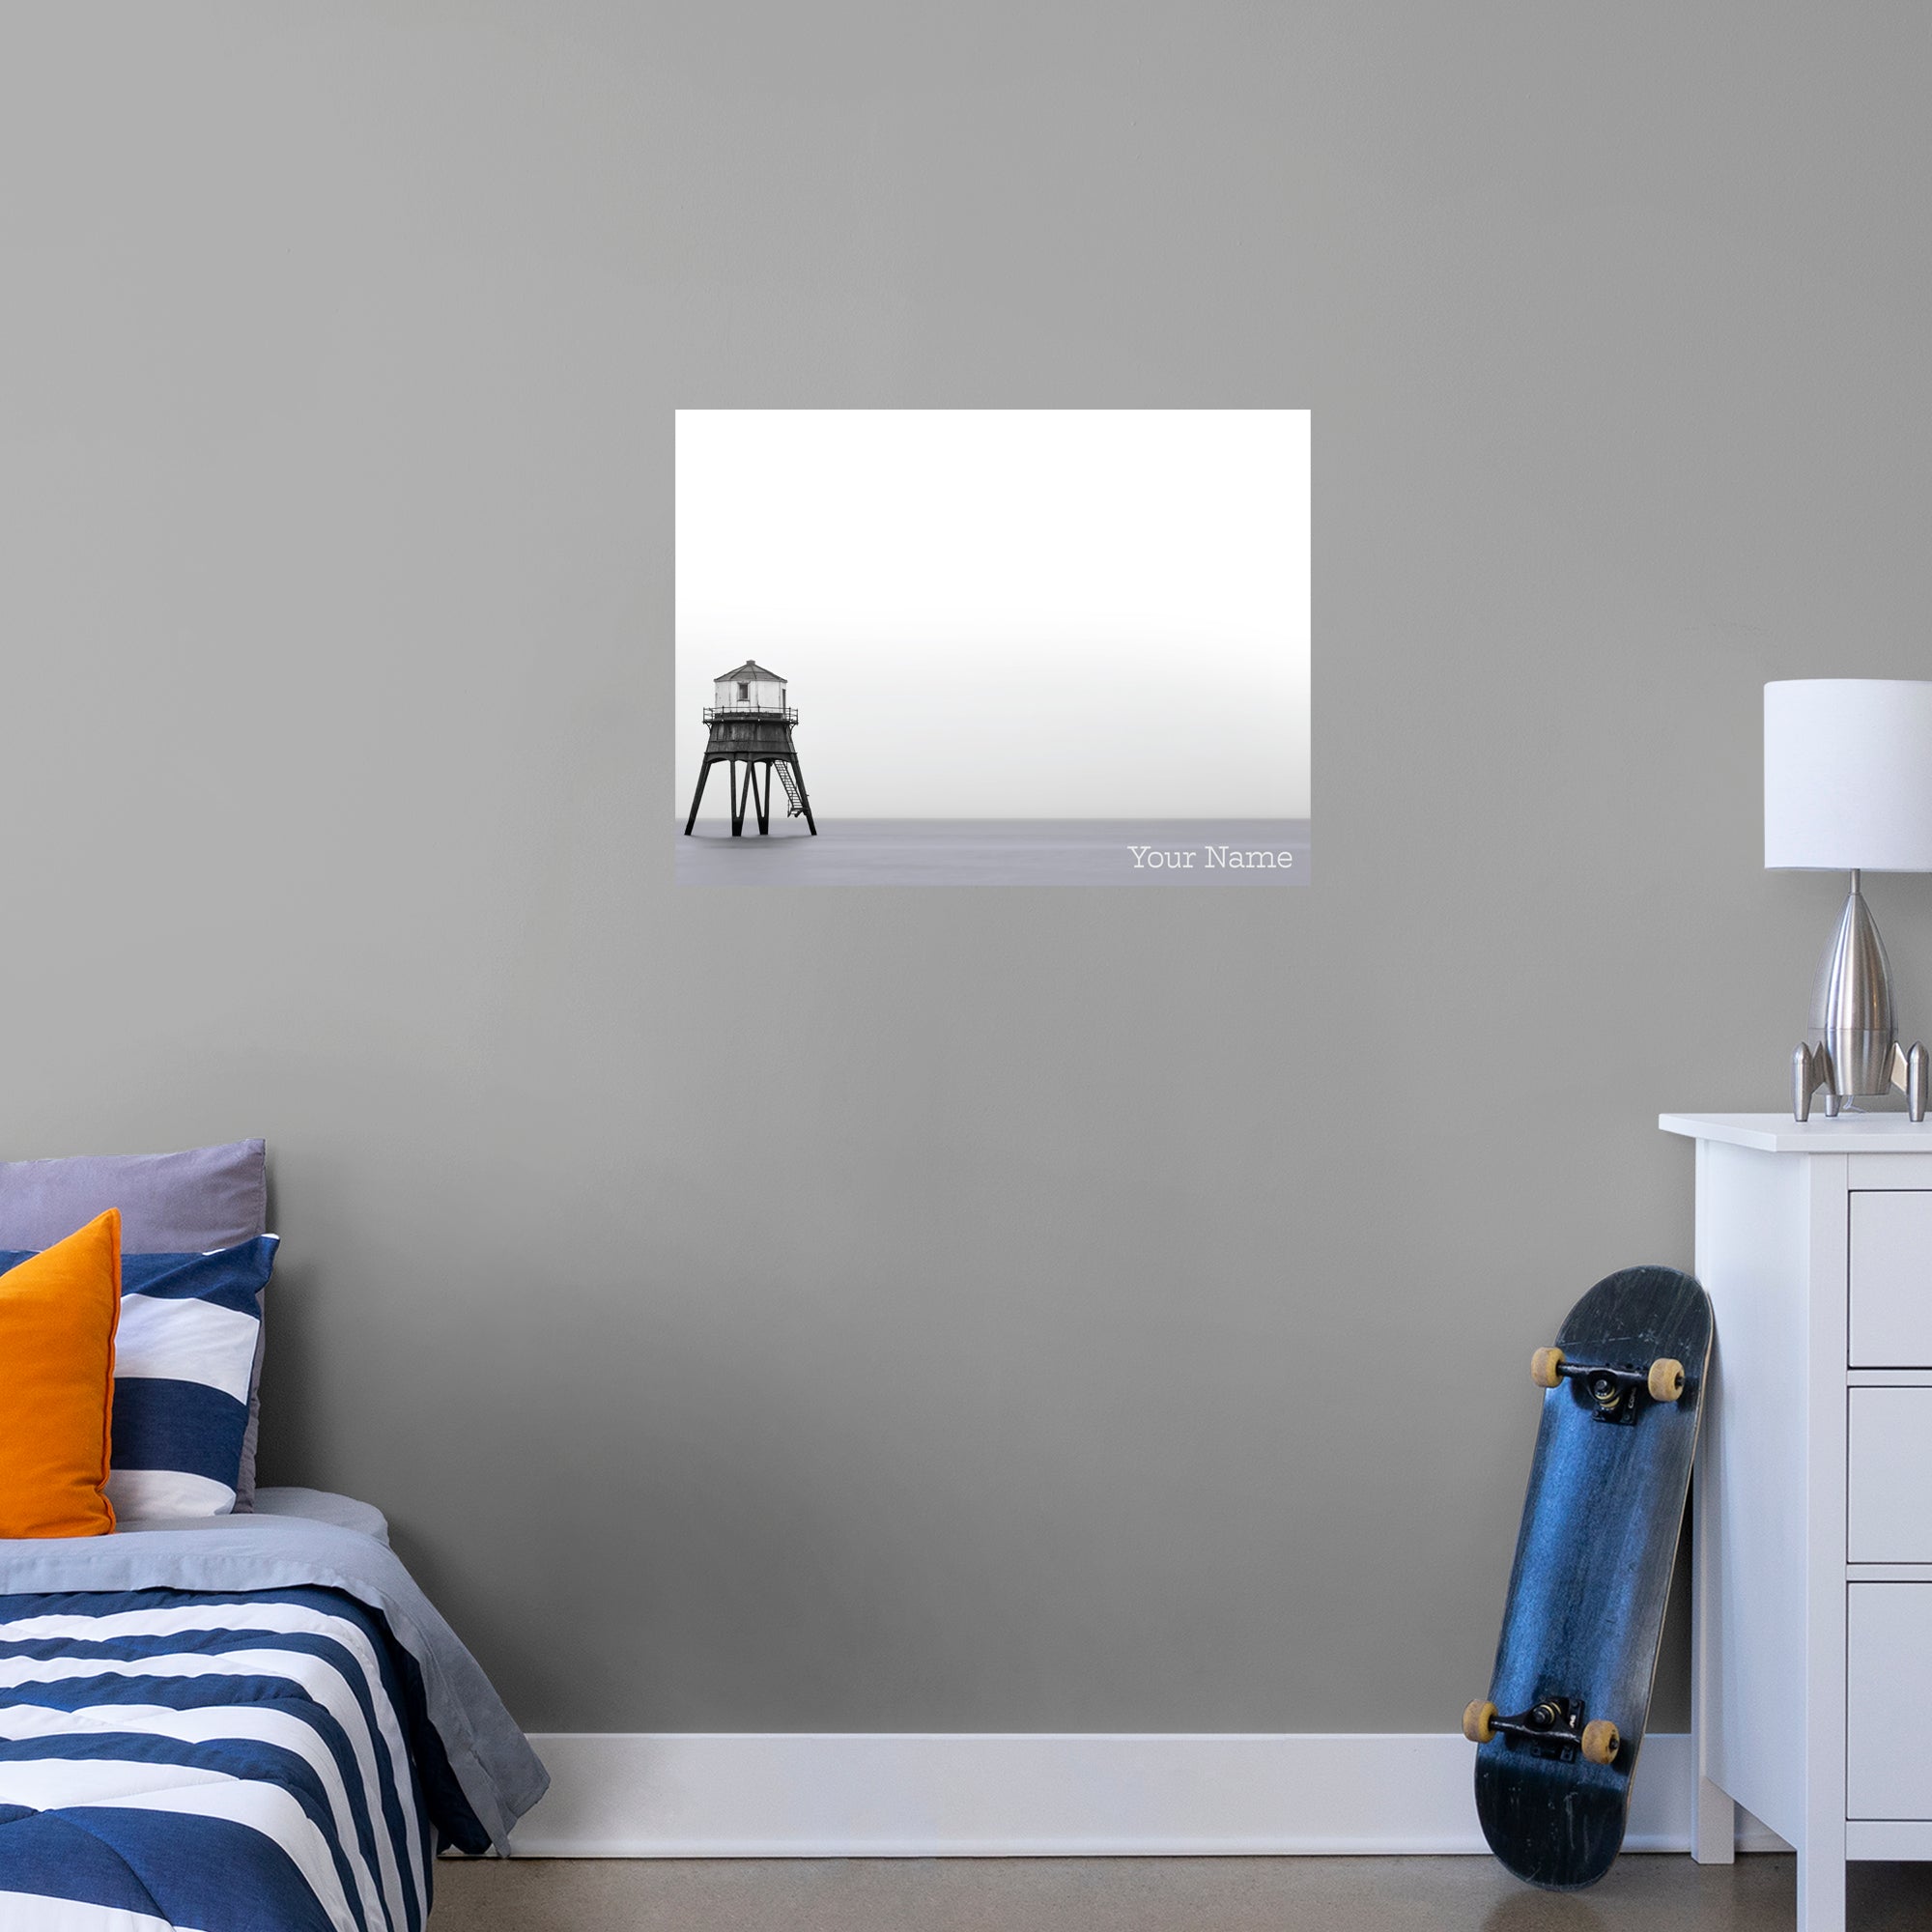 Personalized Dry Erase Boards Lighthouse - Removable Wall Decal XL by Fathead | Vinyl